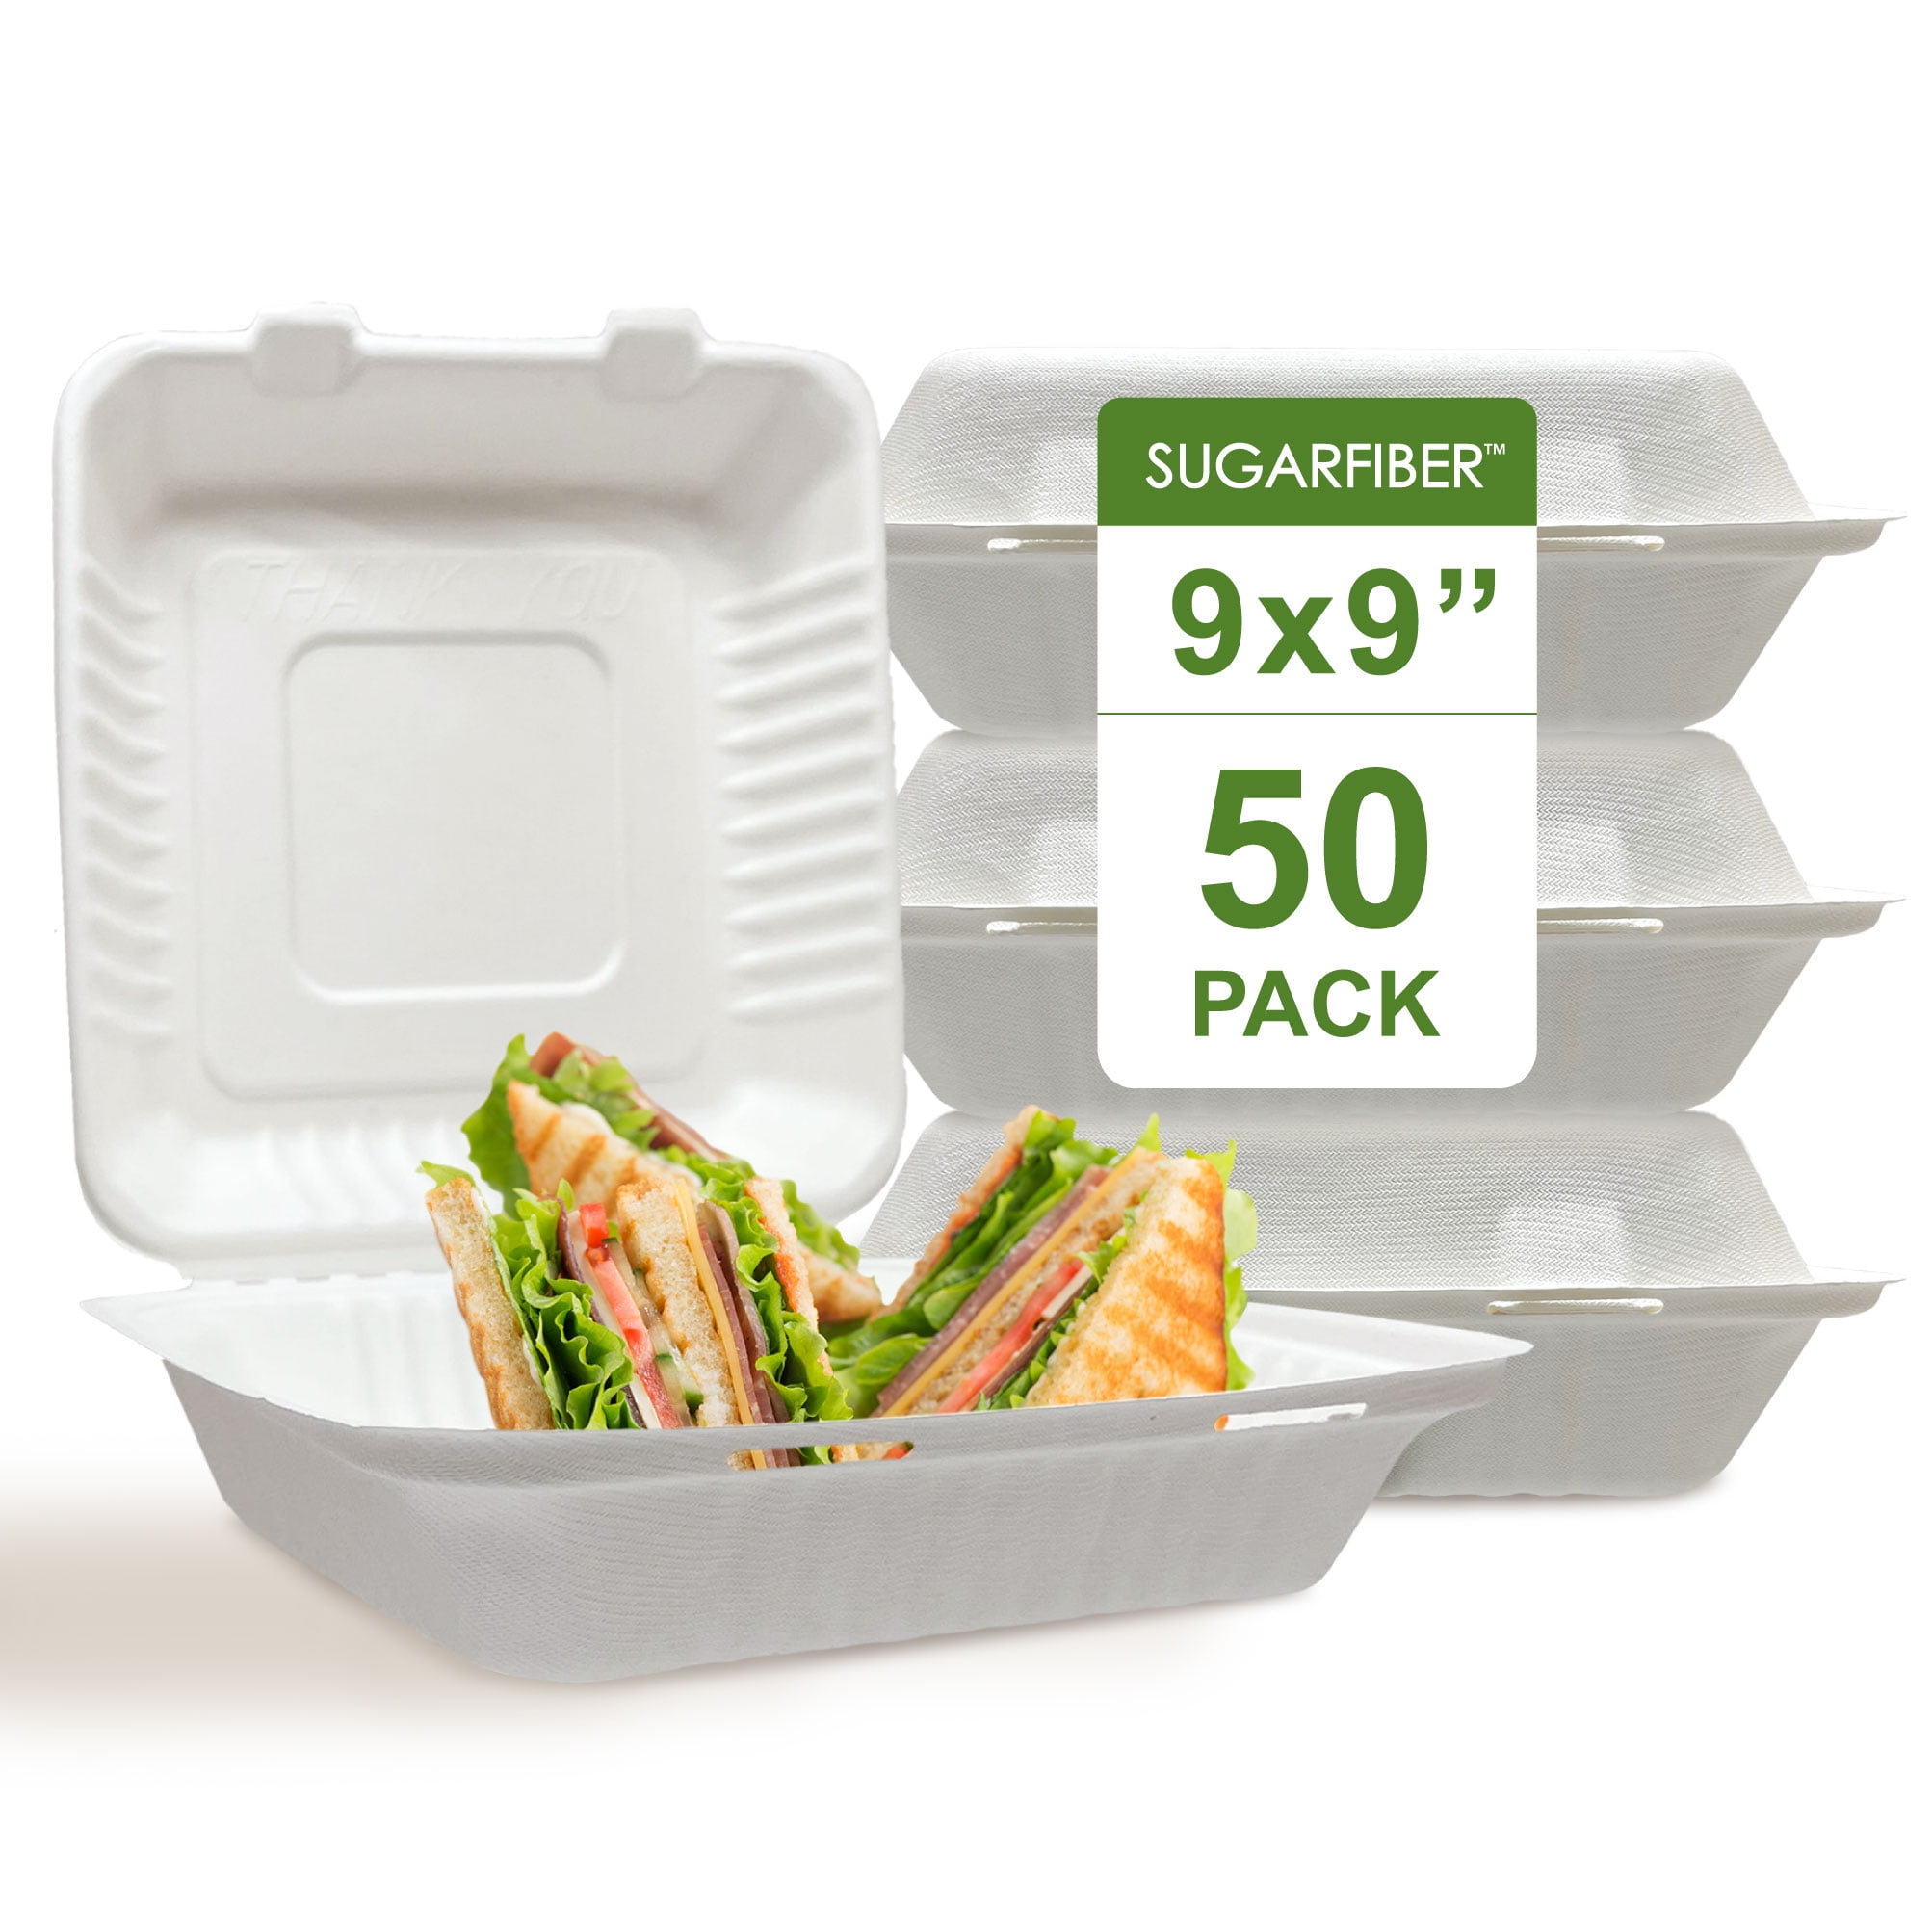 9x6x2.5 Eco-Friendly Disposable Takeout Box / Double Compartment